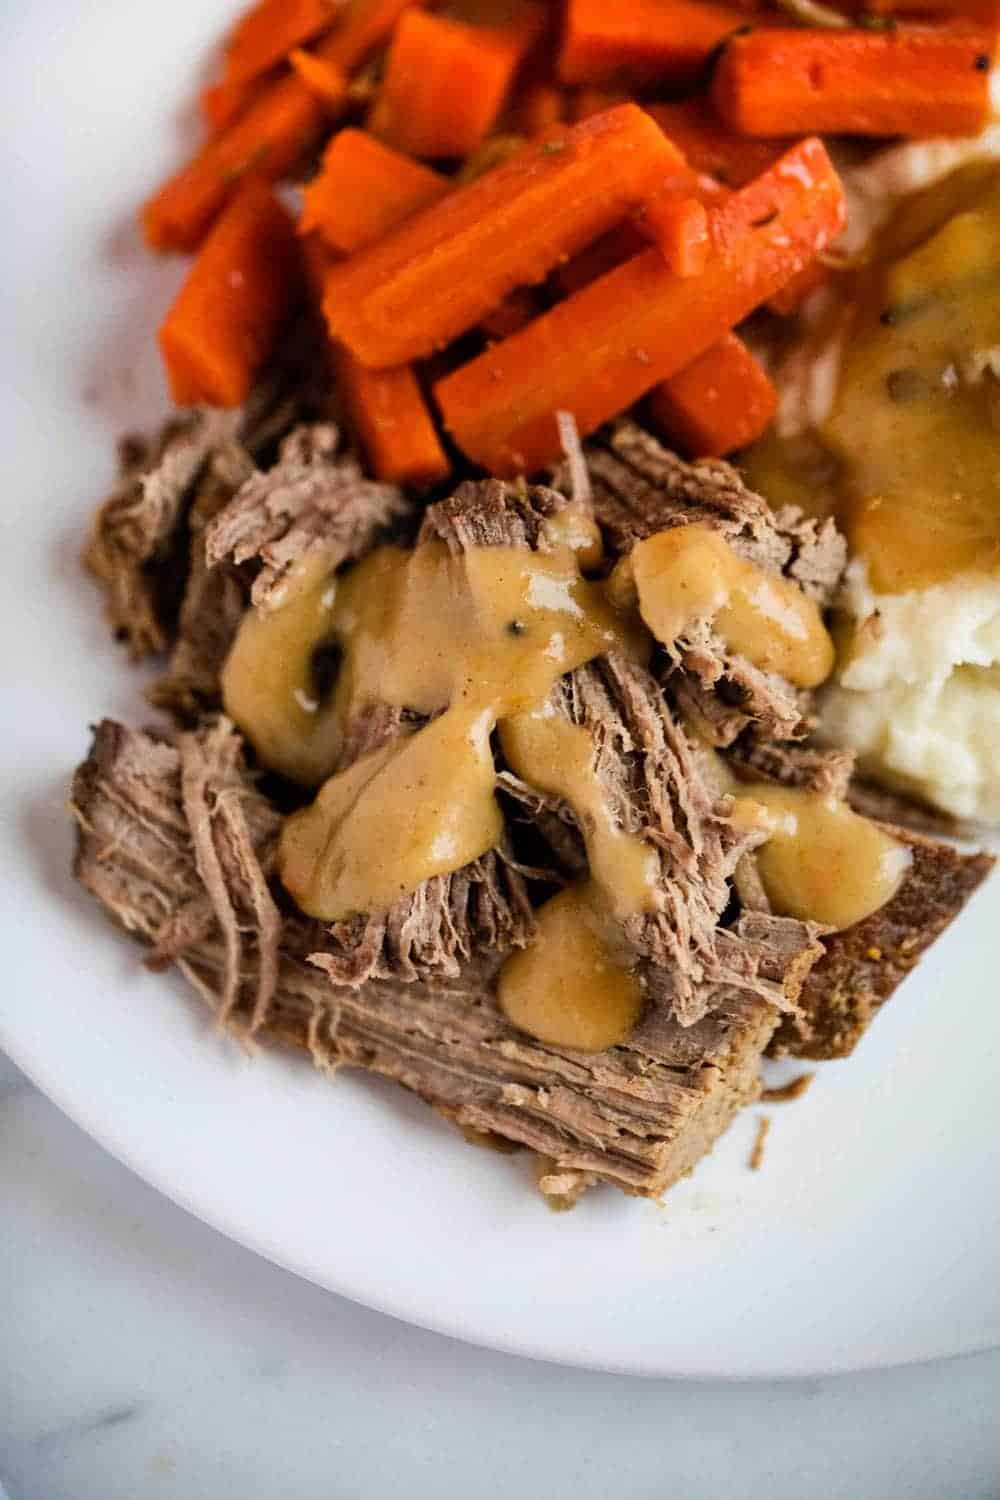 Pot roast on a plate with gravy, mashed potatoes and carrots.